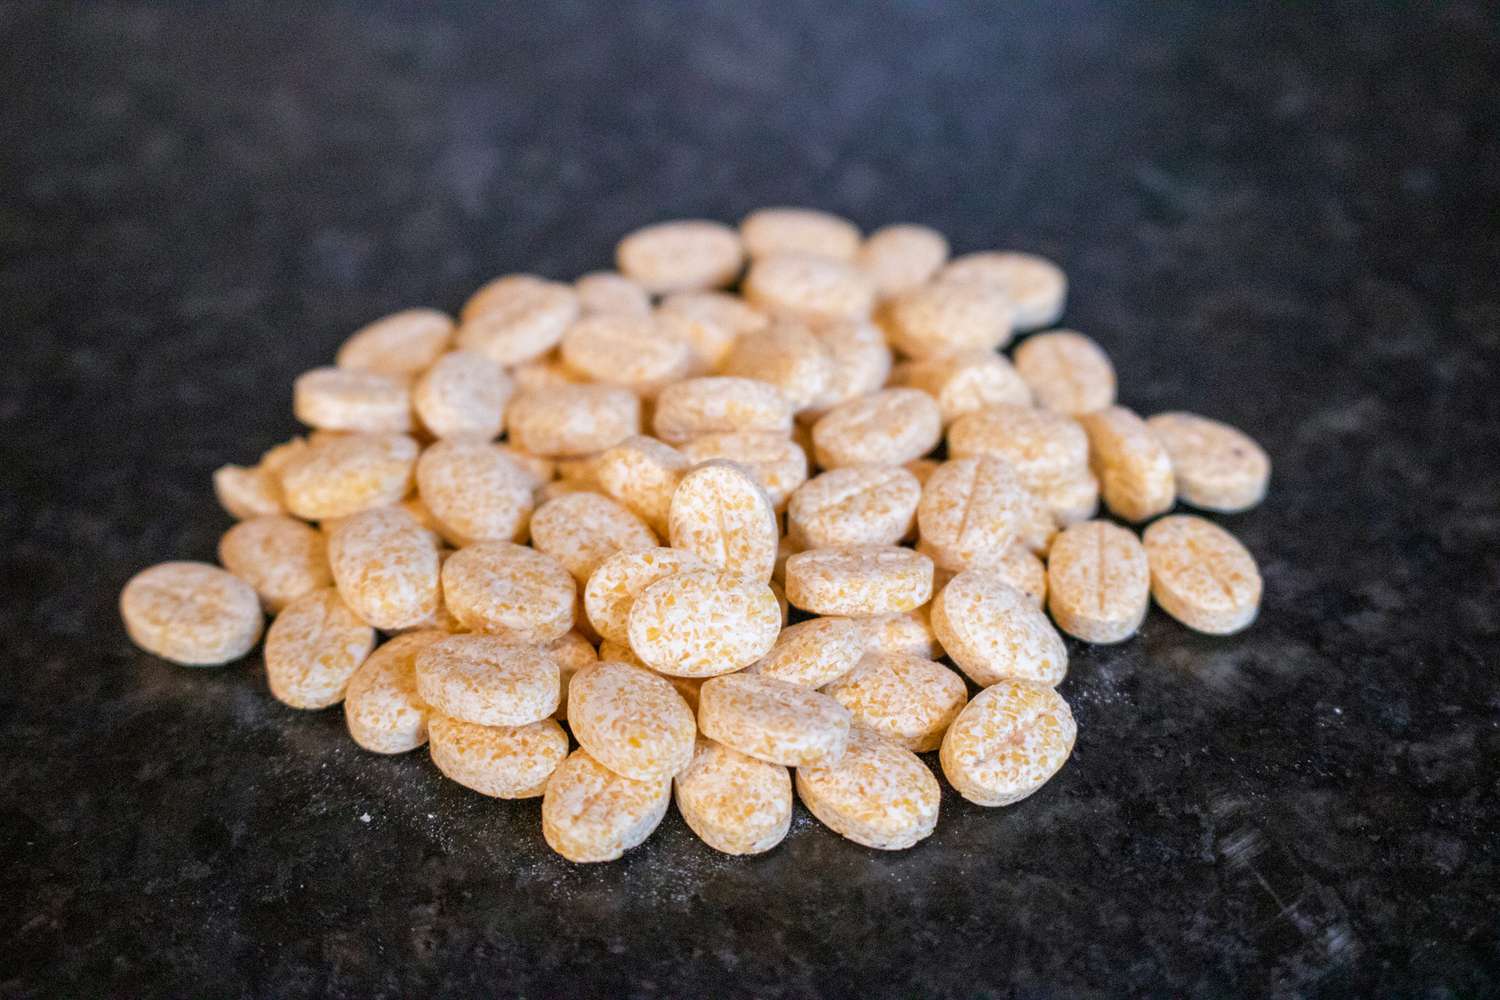 a handful of Grindz tablets on a black countertop